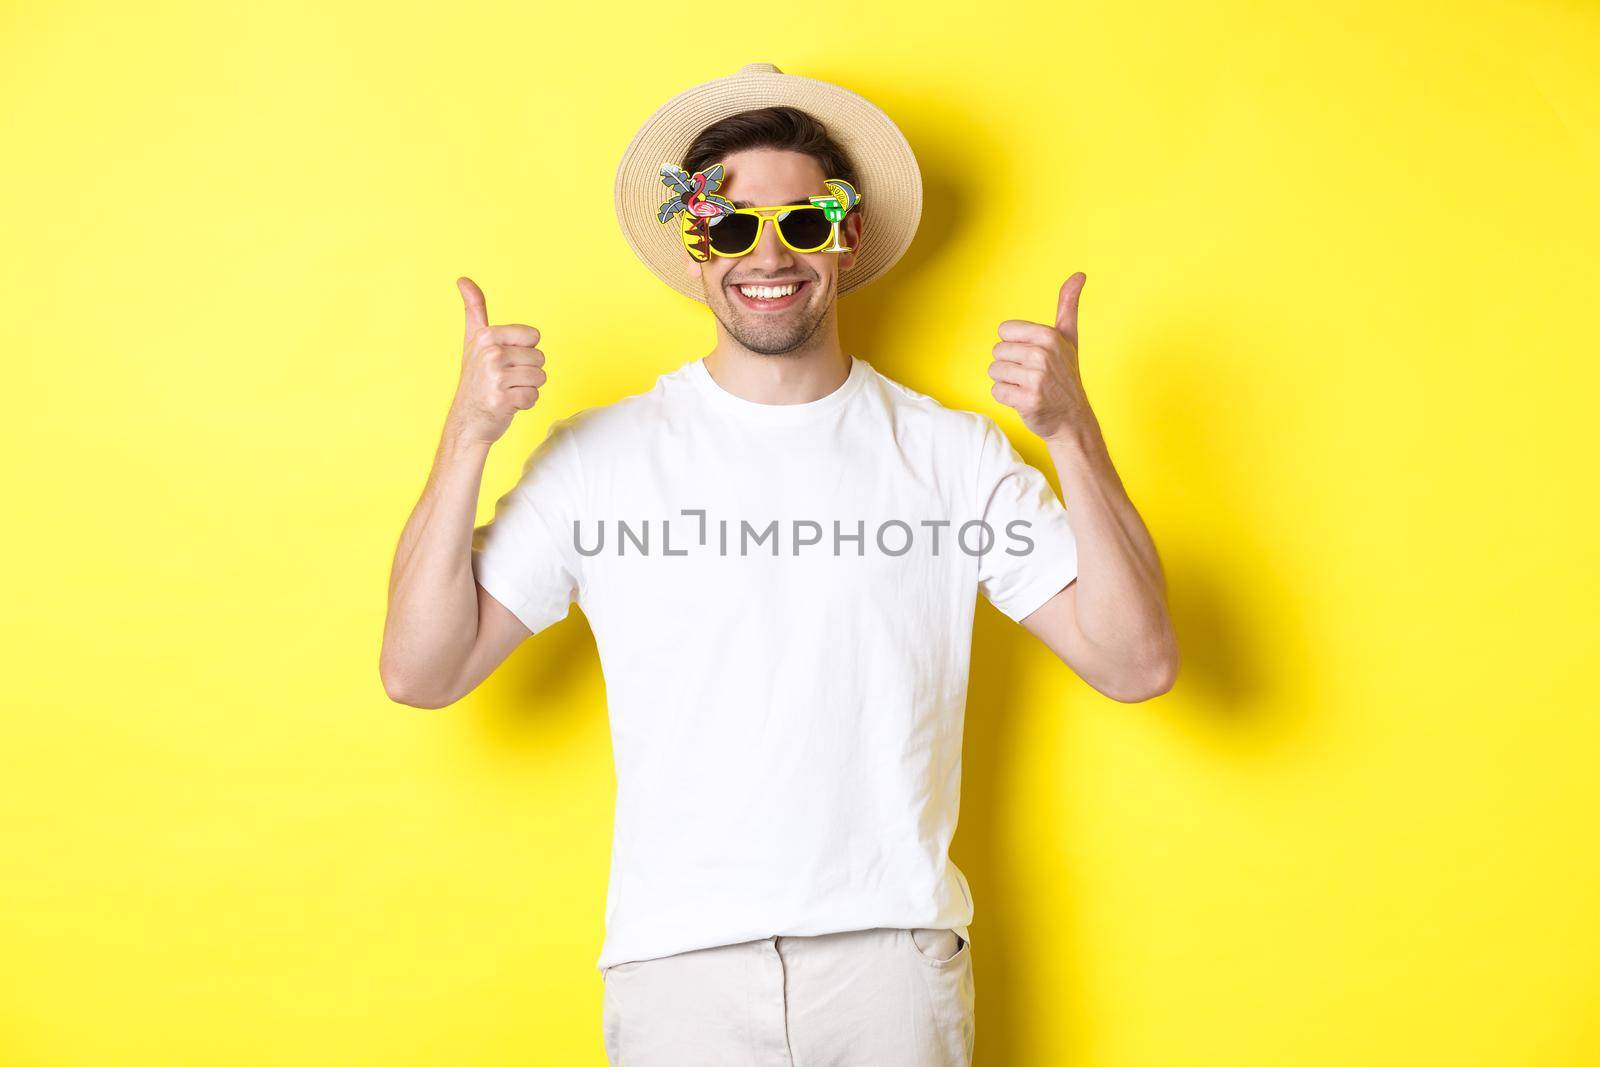 Concept of tourism and lifestyle. Image of smiling tourist showing thumbs-up, enjoying trip and recommending, wearing summer hat and sunglasses, yellow background.